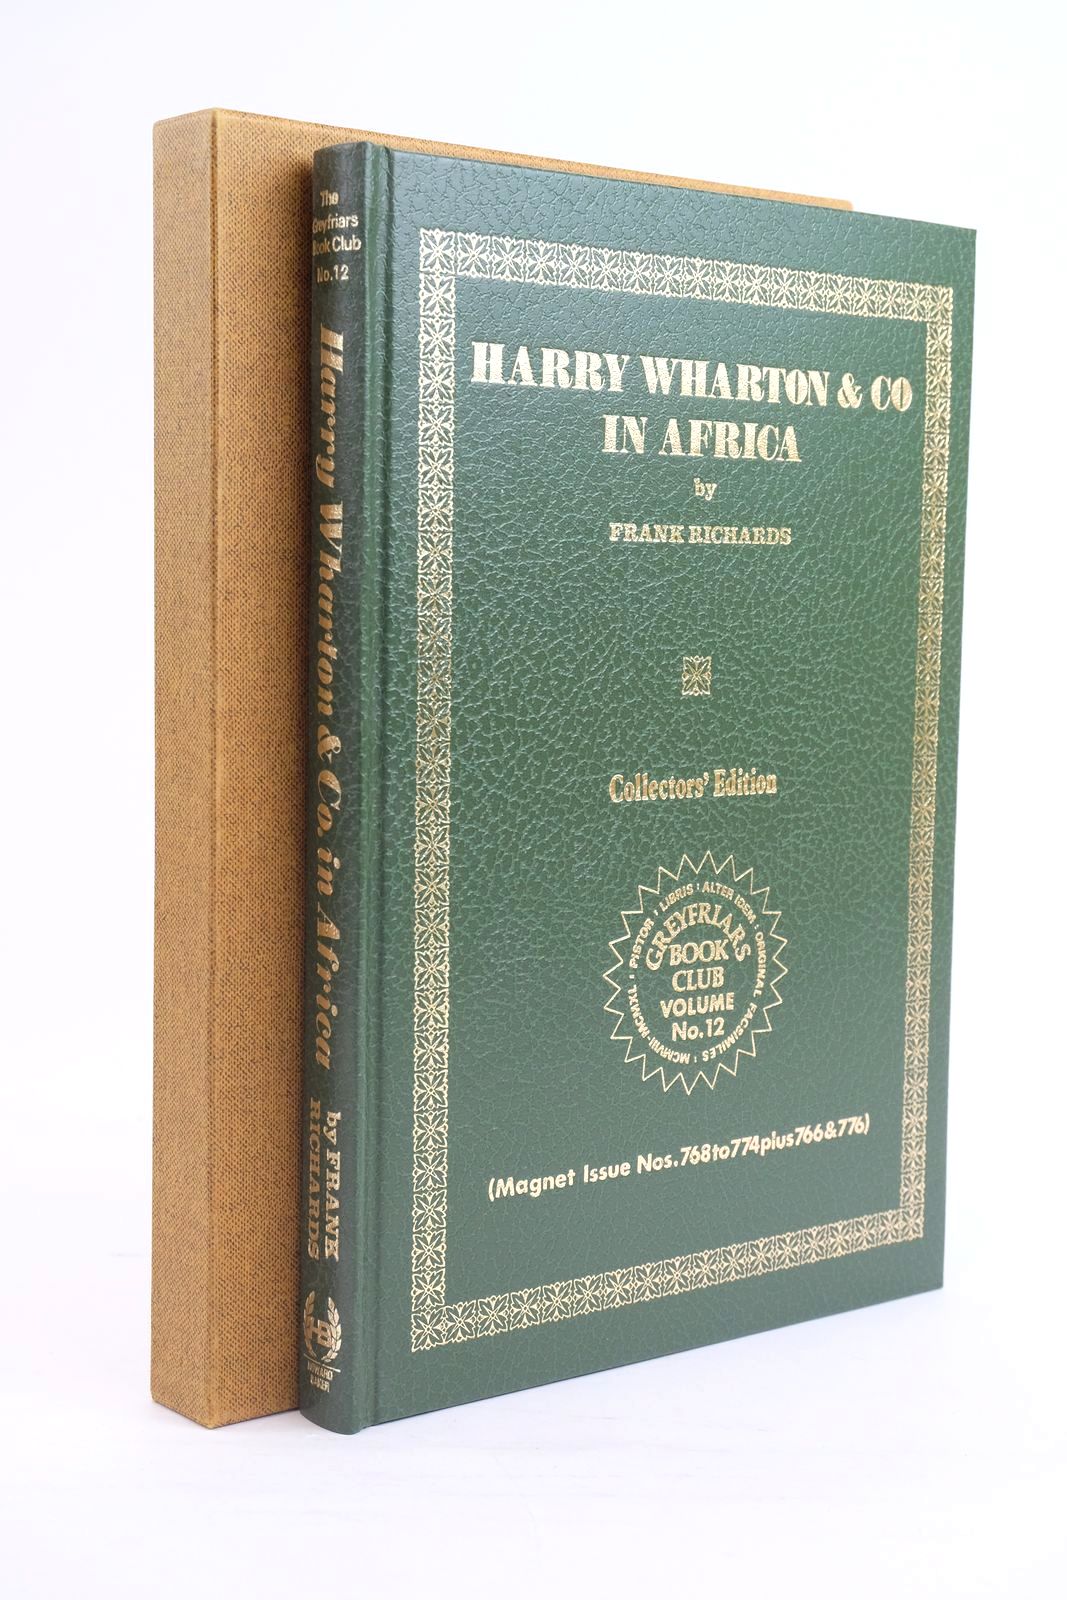 Photo of HARRY WHARTON & CO IN AFRICA- Stock Number: 1319976